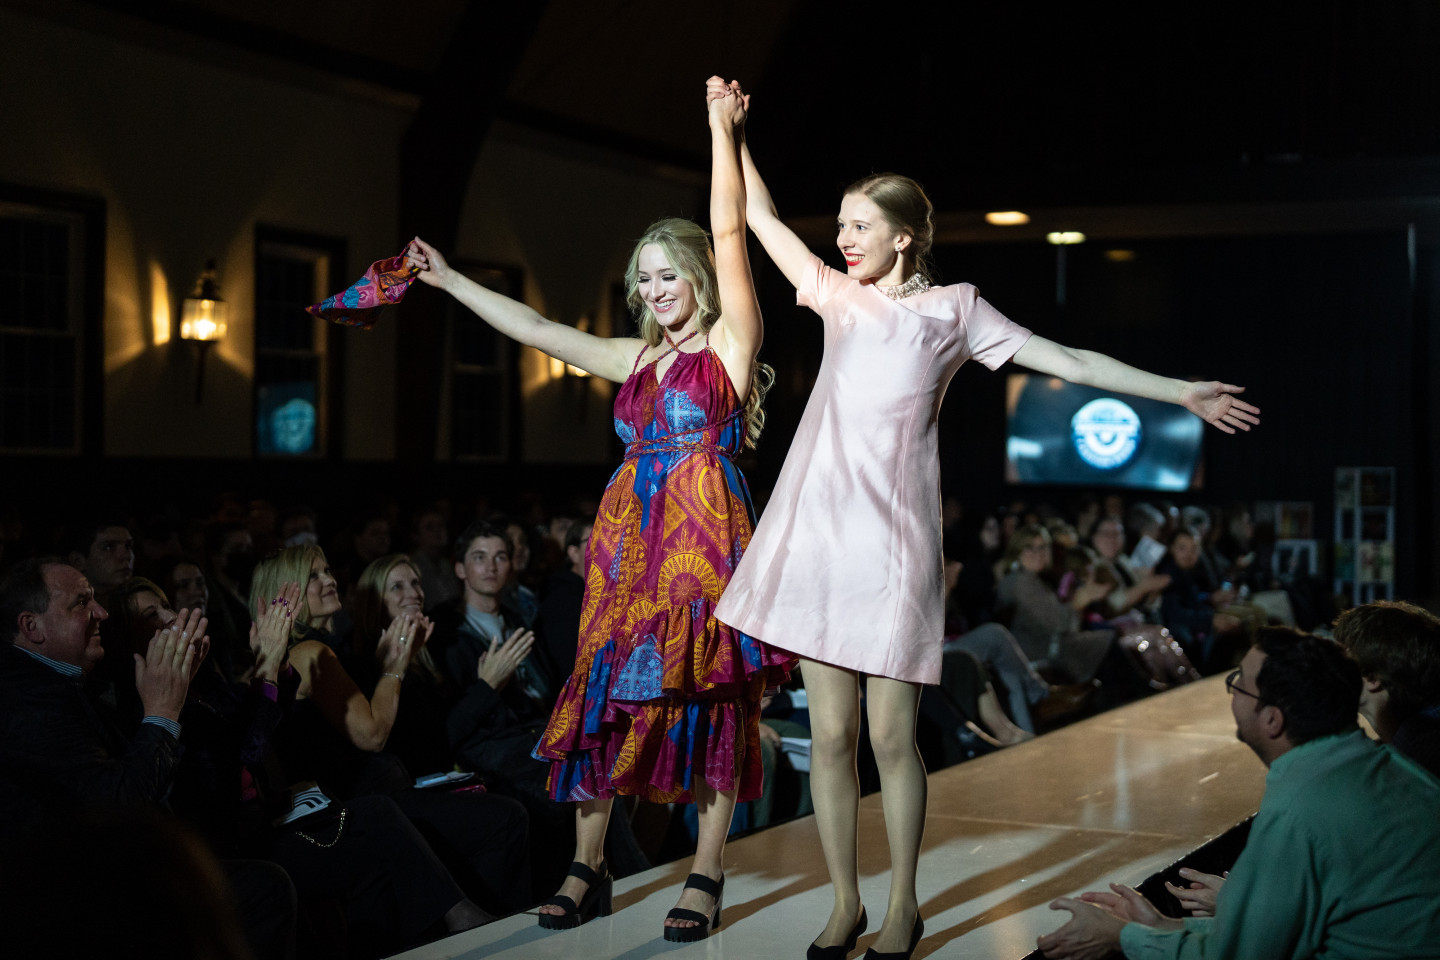 Two young women raise their hands on a fashion runway.